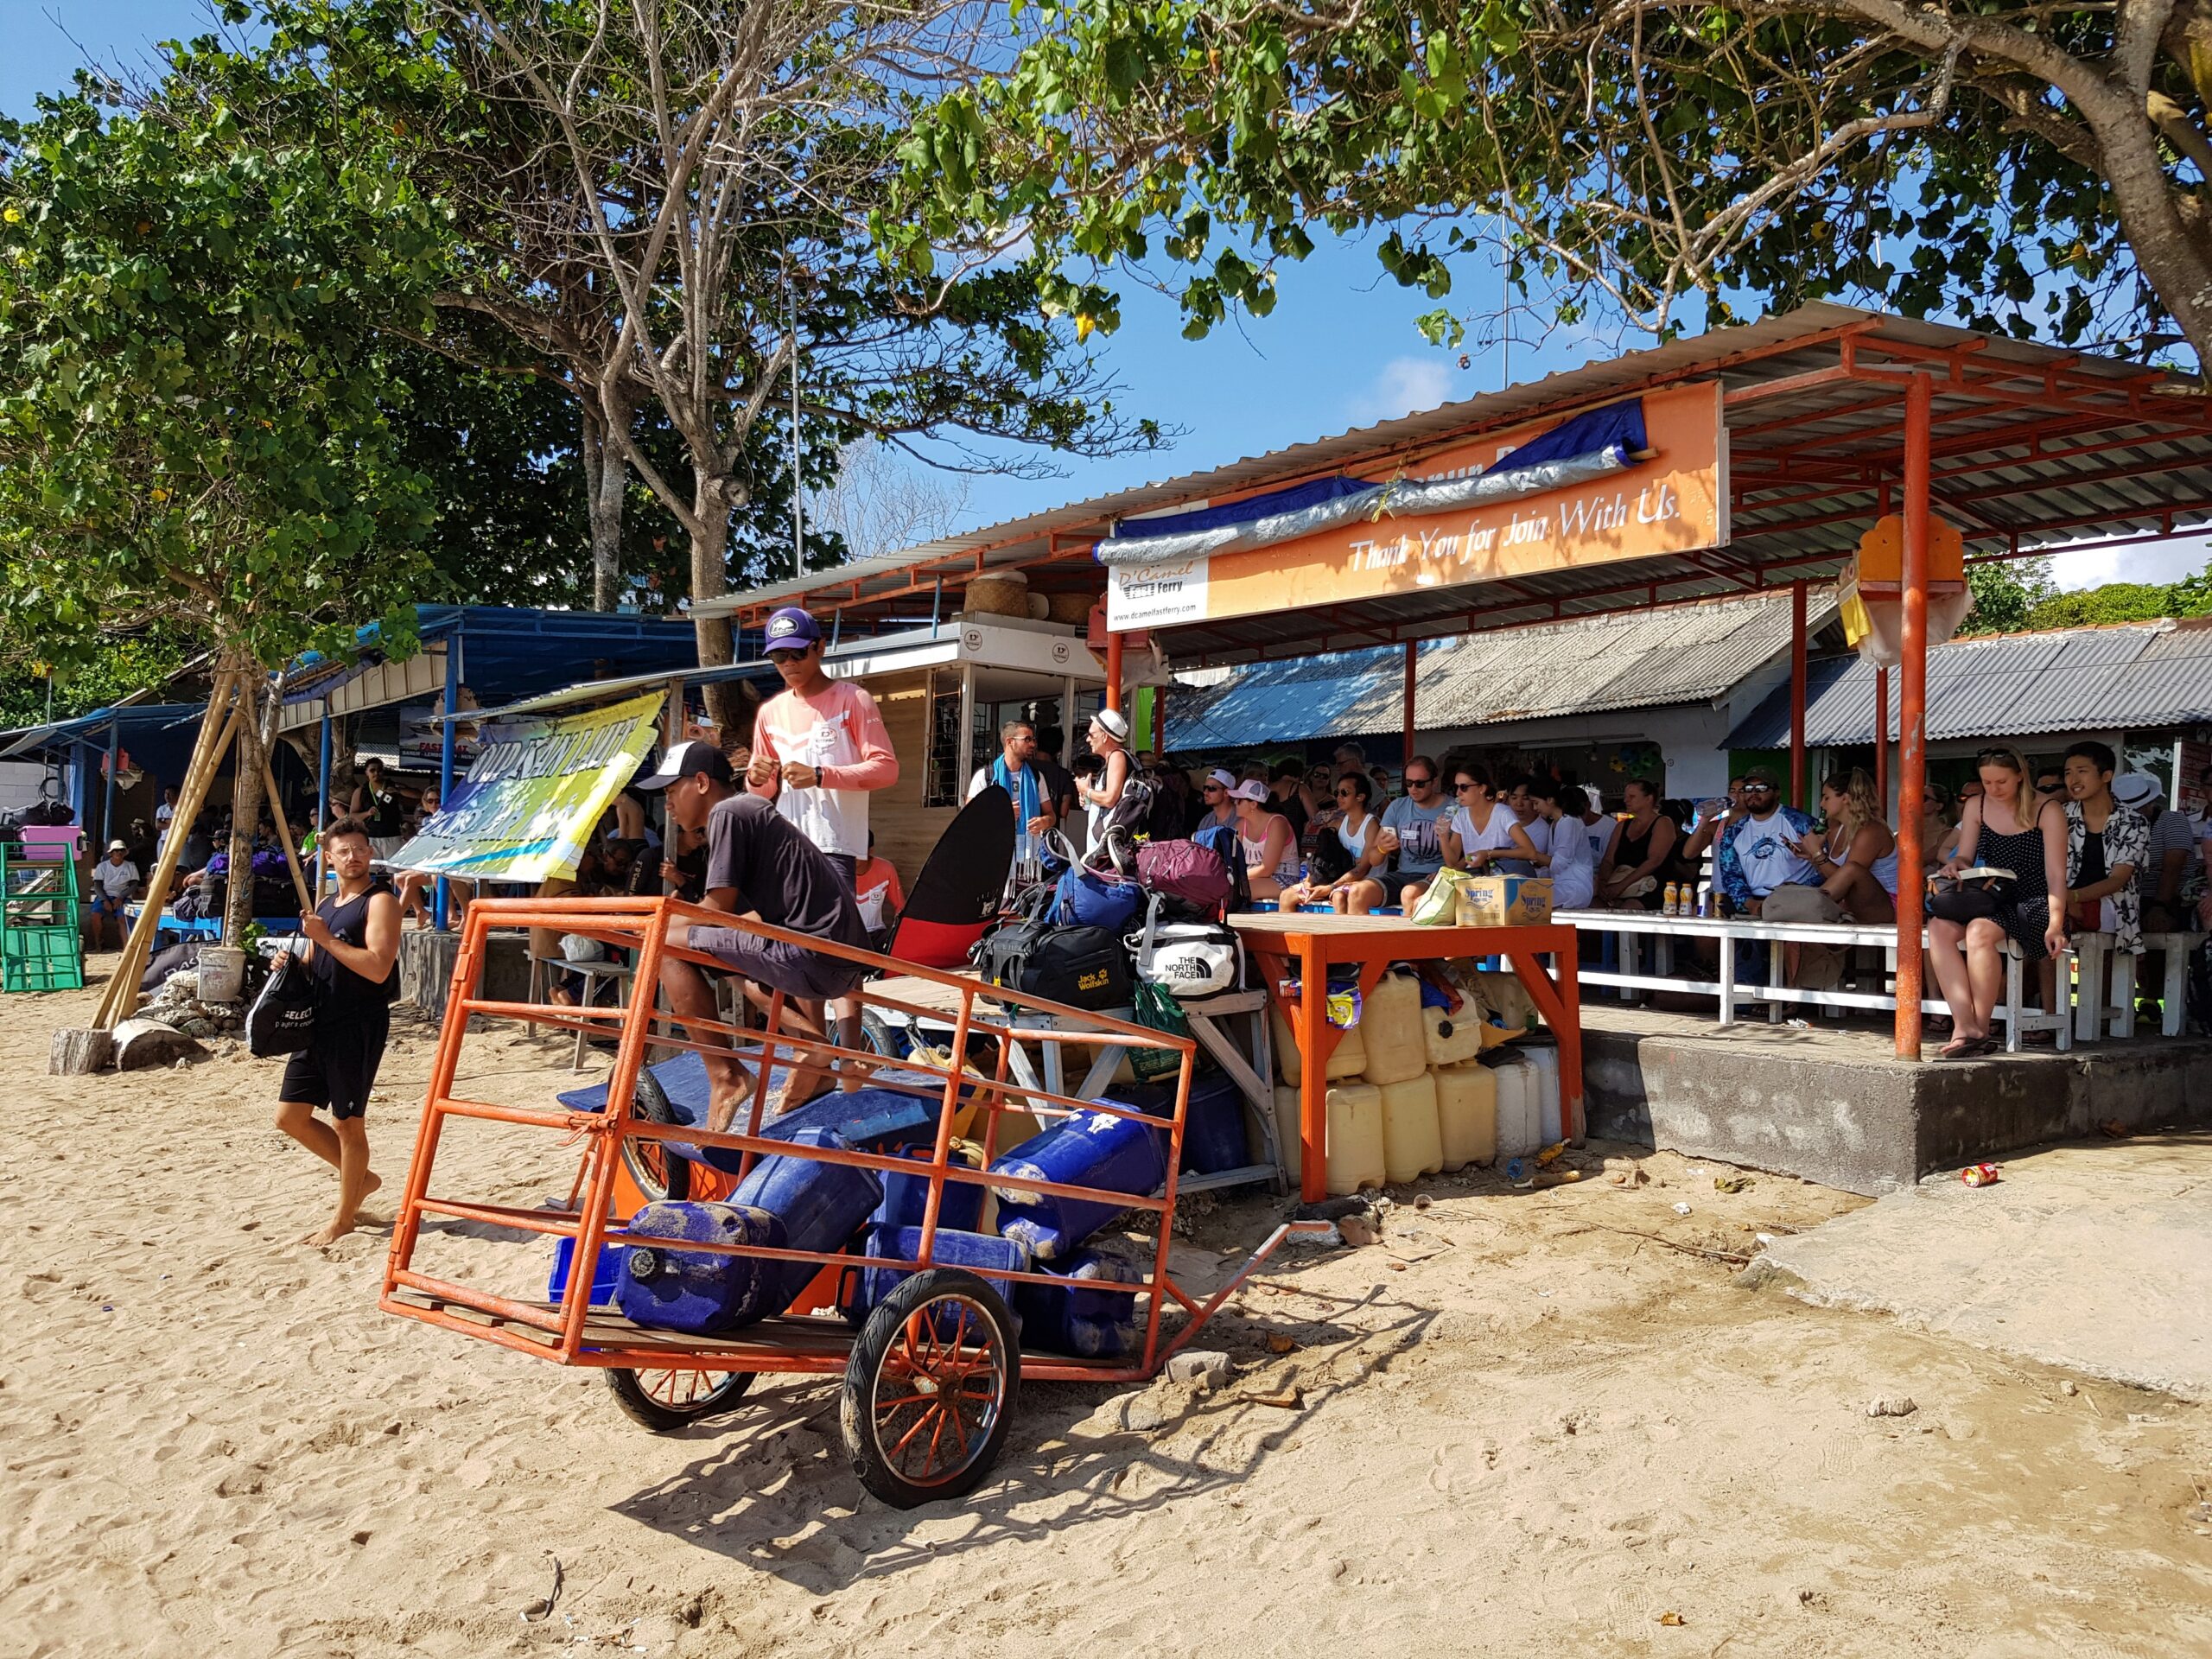 People wait under a shelter on the beach.